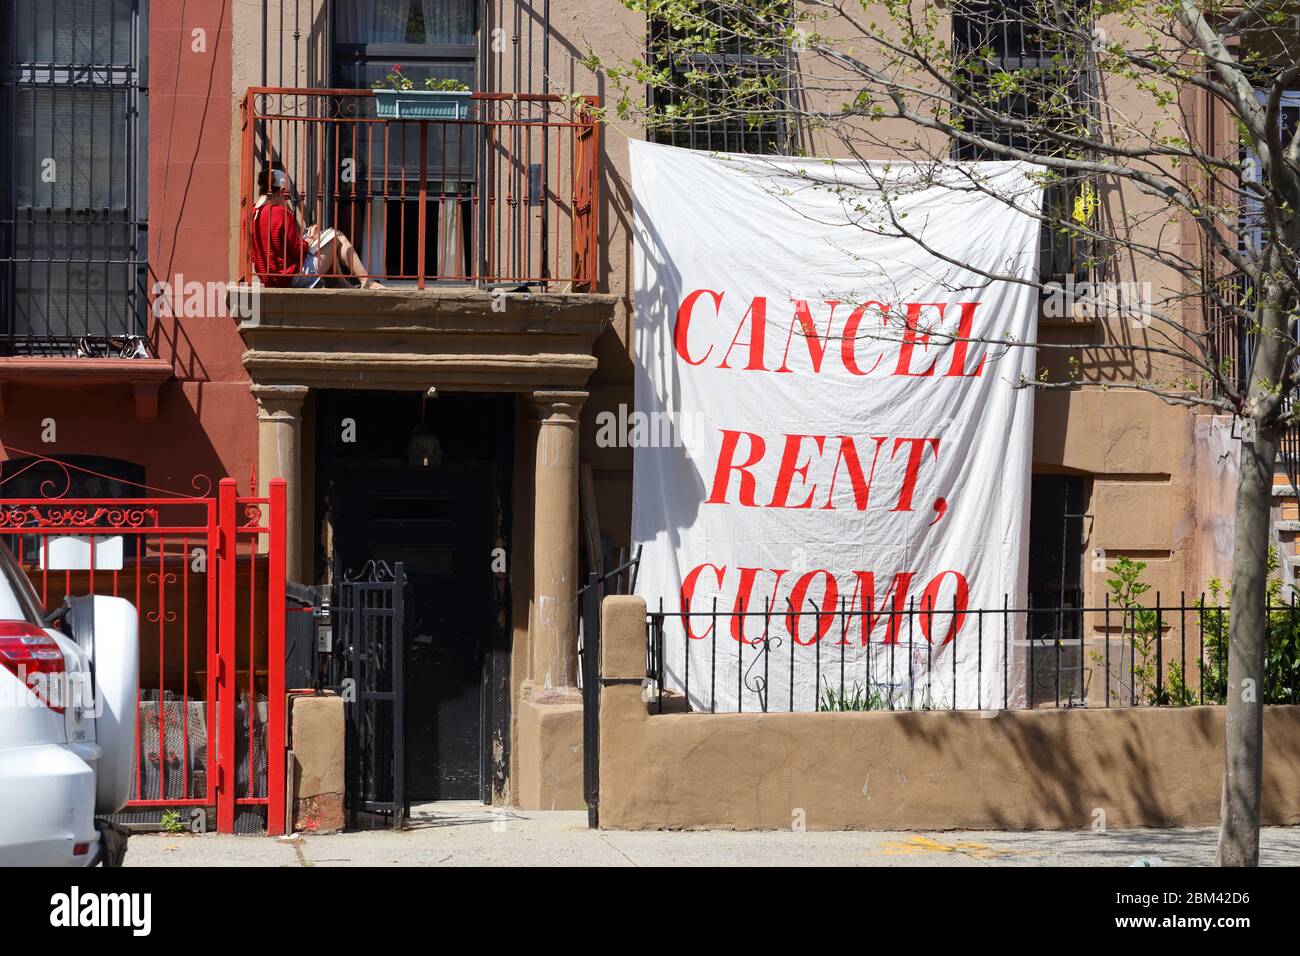 A large 'Cancel Rent, Cuomo' banner draped outside a building in Brooklyn, New York. Layoffs due to the coronavirus... SEE MORE INFO FOR FULL CAPTION Stock Photo